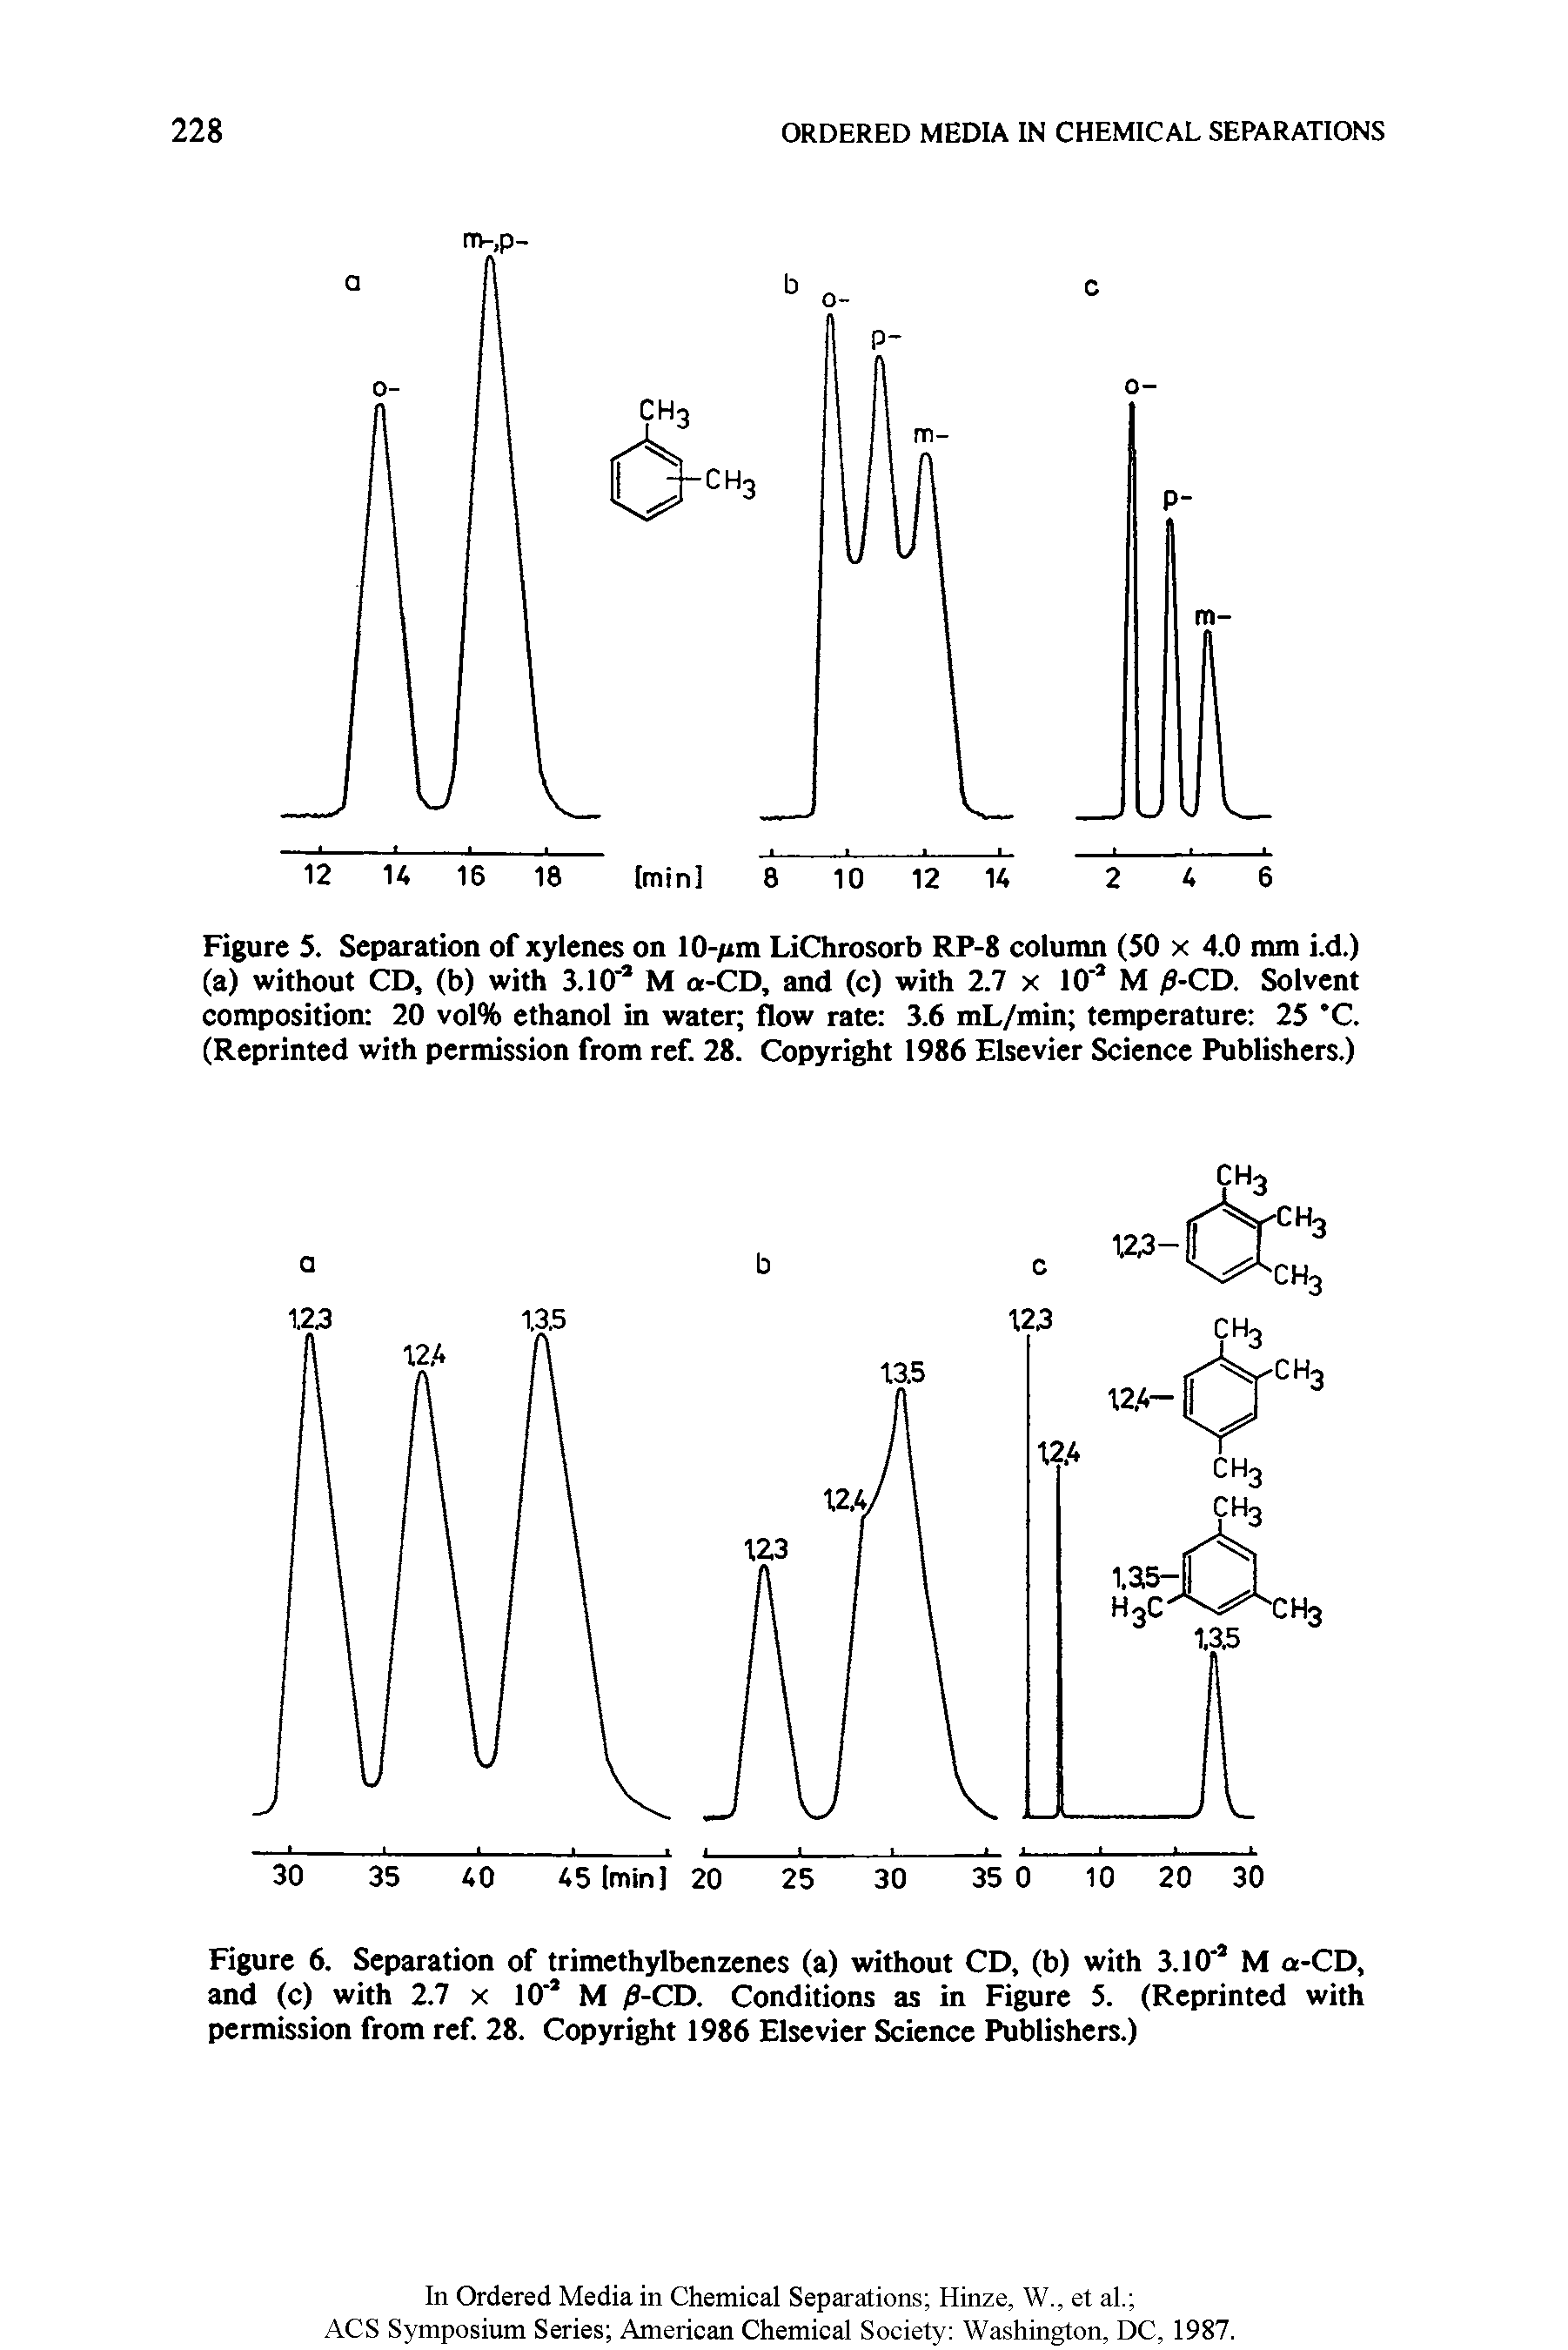 Figure 5. Separation of xylenes on 10-/im LiChrosorb RP-8 column (50 x 4.0 mm i.d.) (a) without CD, (b) with 3.1 O 1 M a-CD, and (c) with 2.7 x 10"J M fi-CD. Solvent composition 20 vol% ethanol in water flow rate 3.6 mL/min temperature 25 C. (Reprinted with permission from ref. 28. Copyright 1986 Elsevier Science Publishers.)...